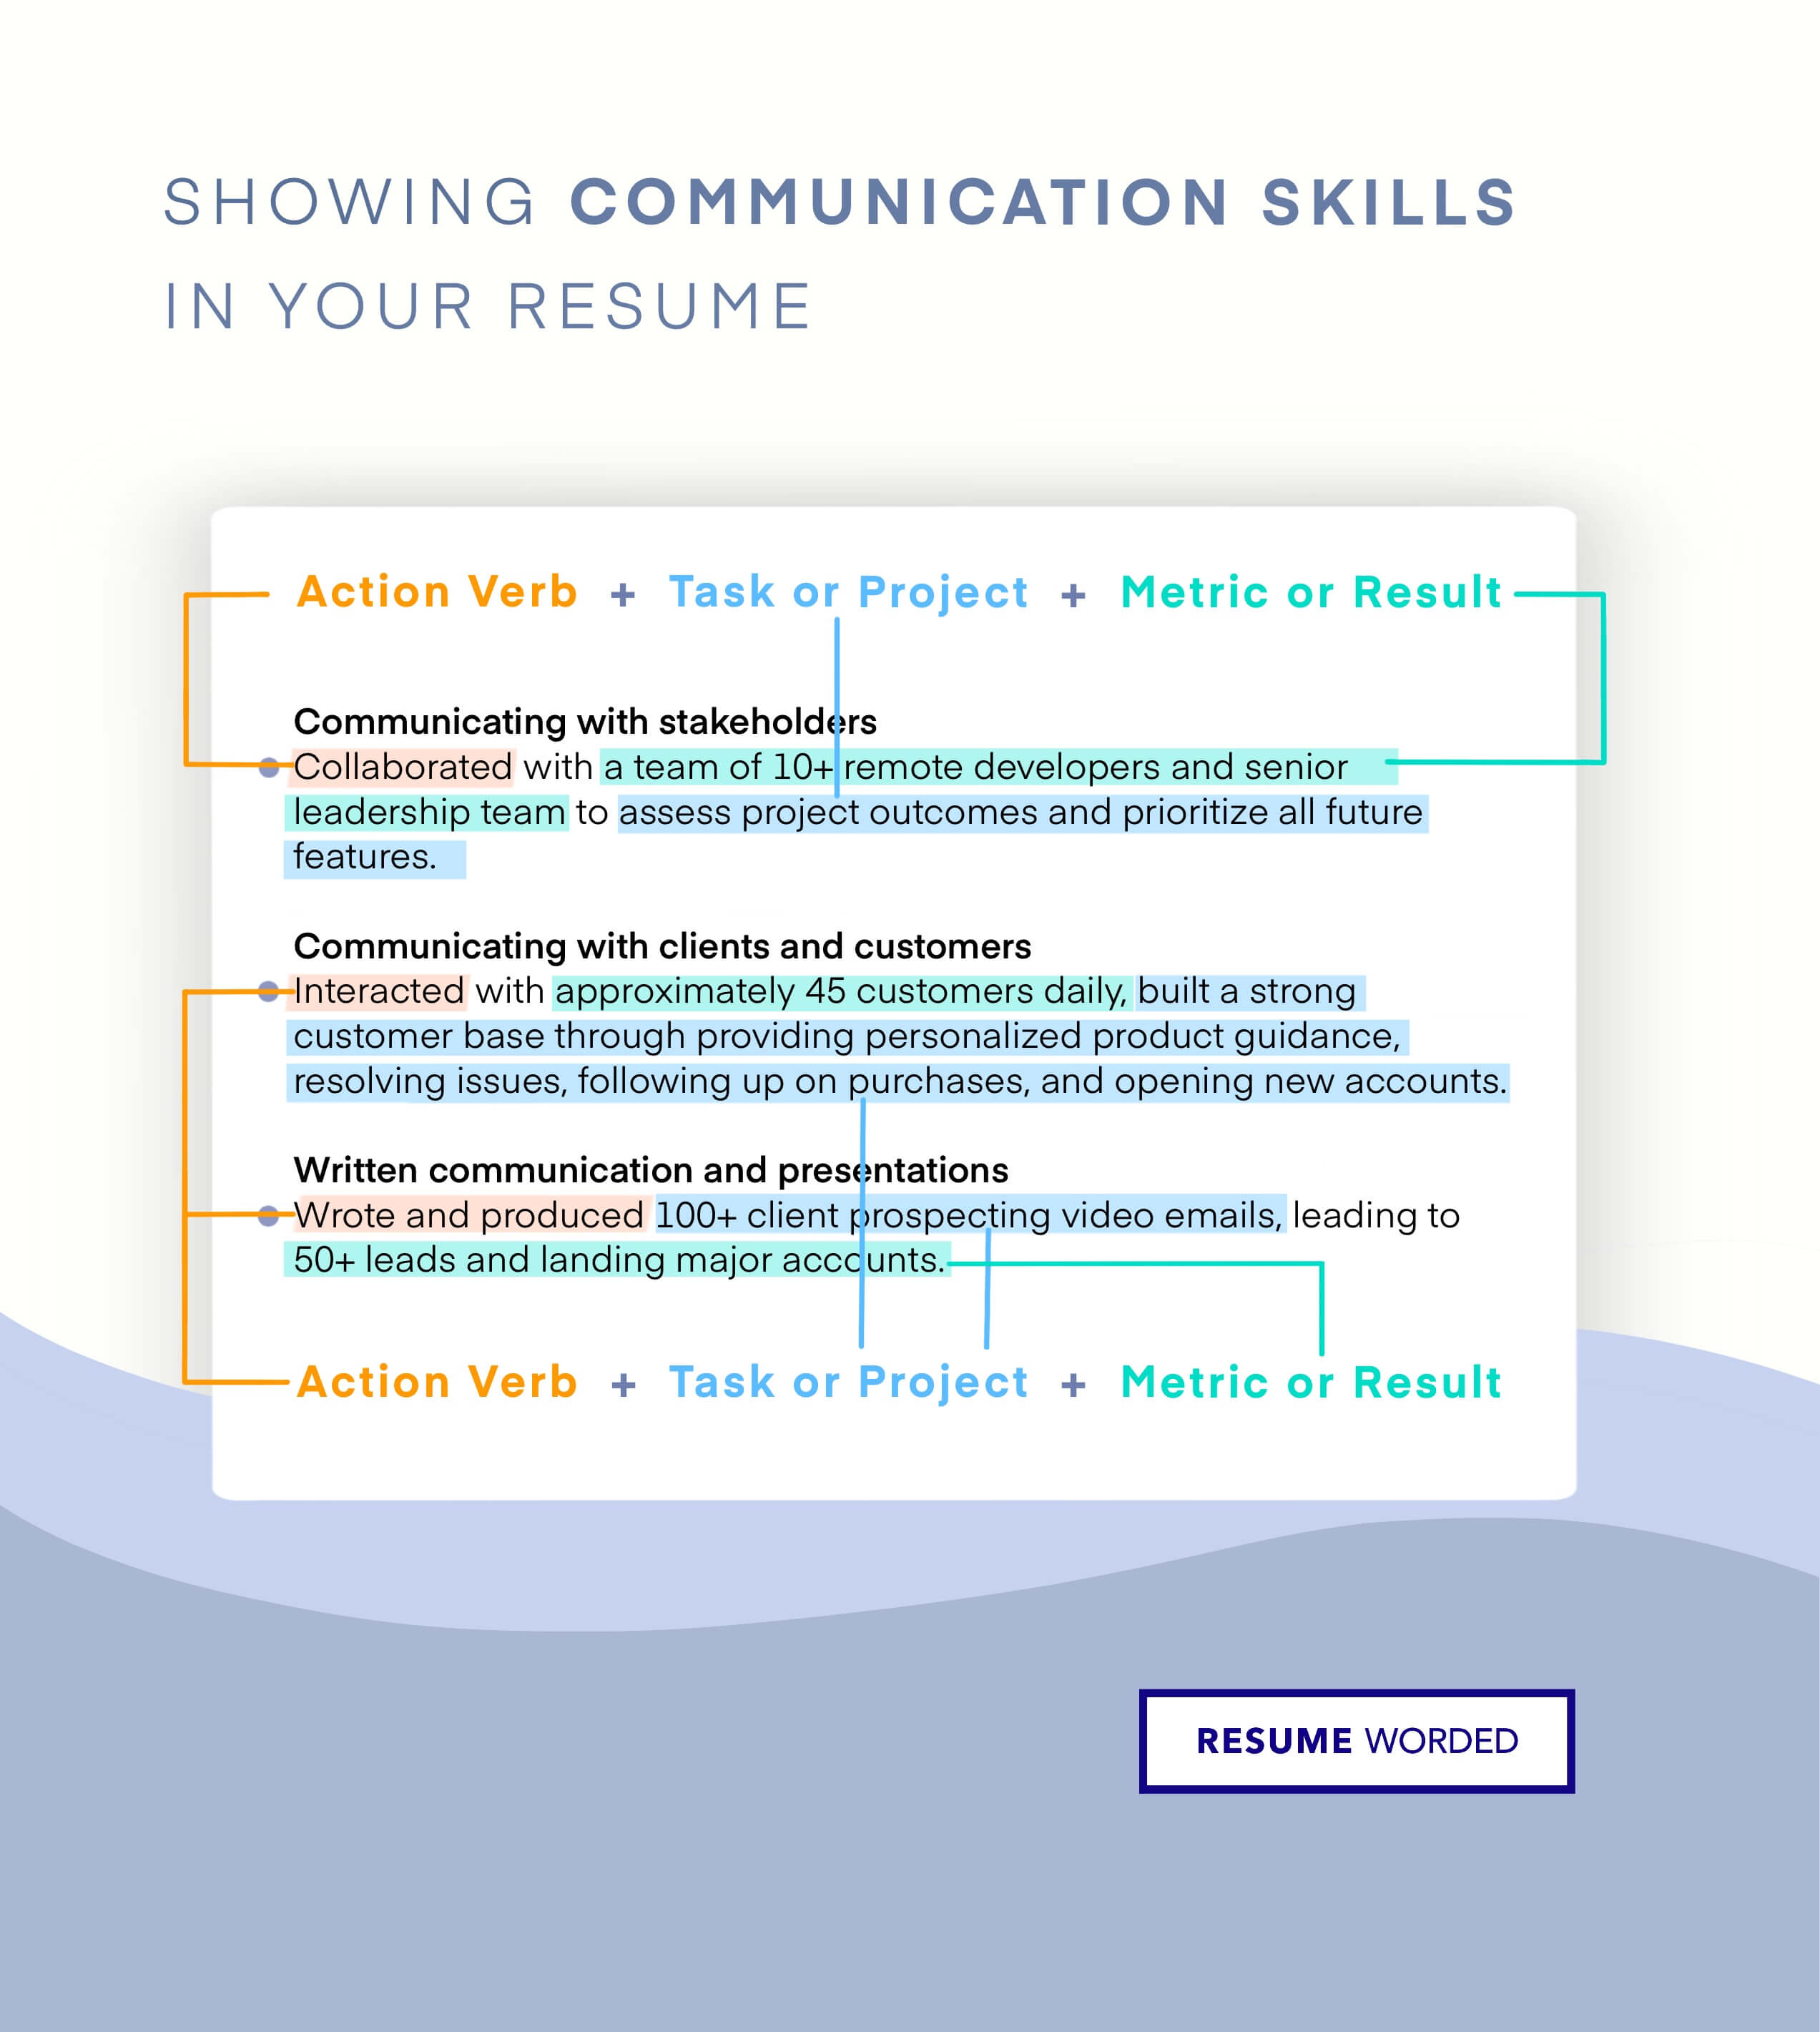 Showcase leadership and communication skills - IT Project Manager CV